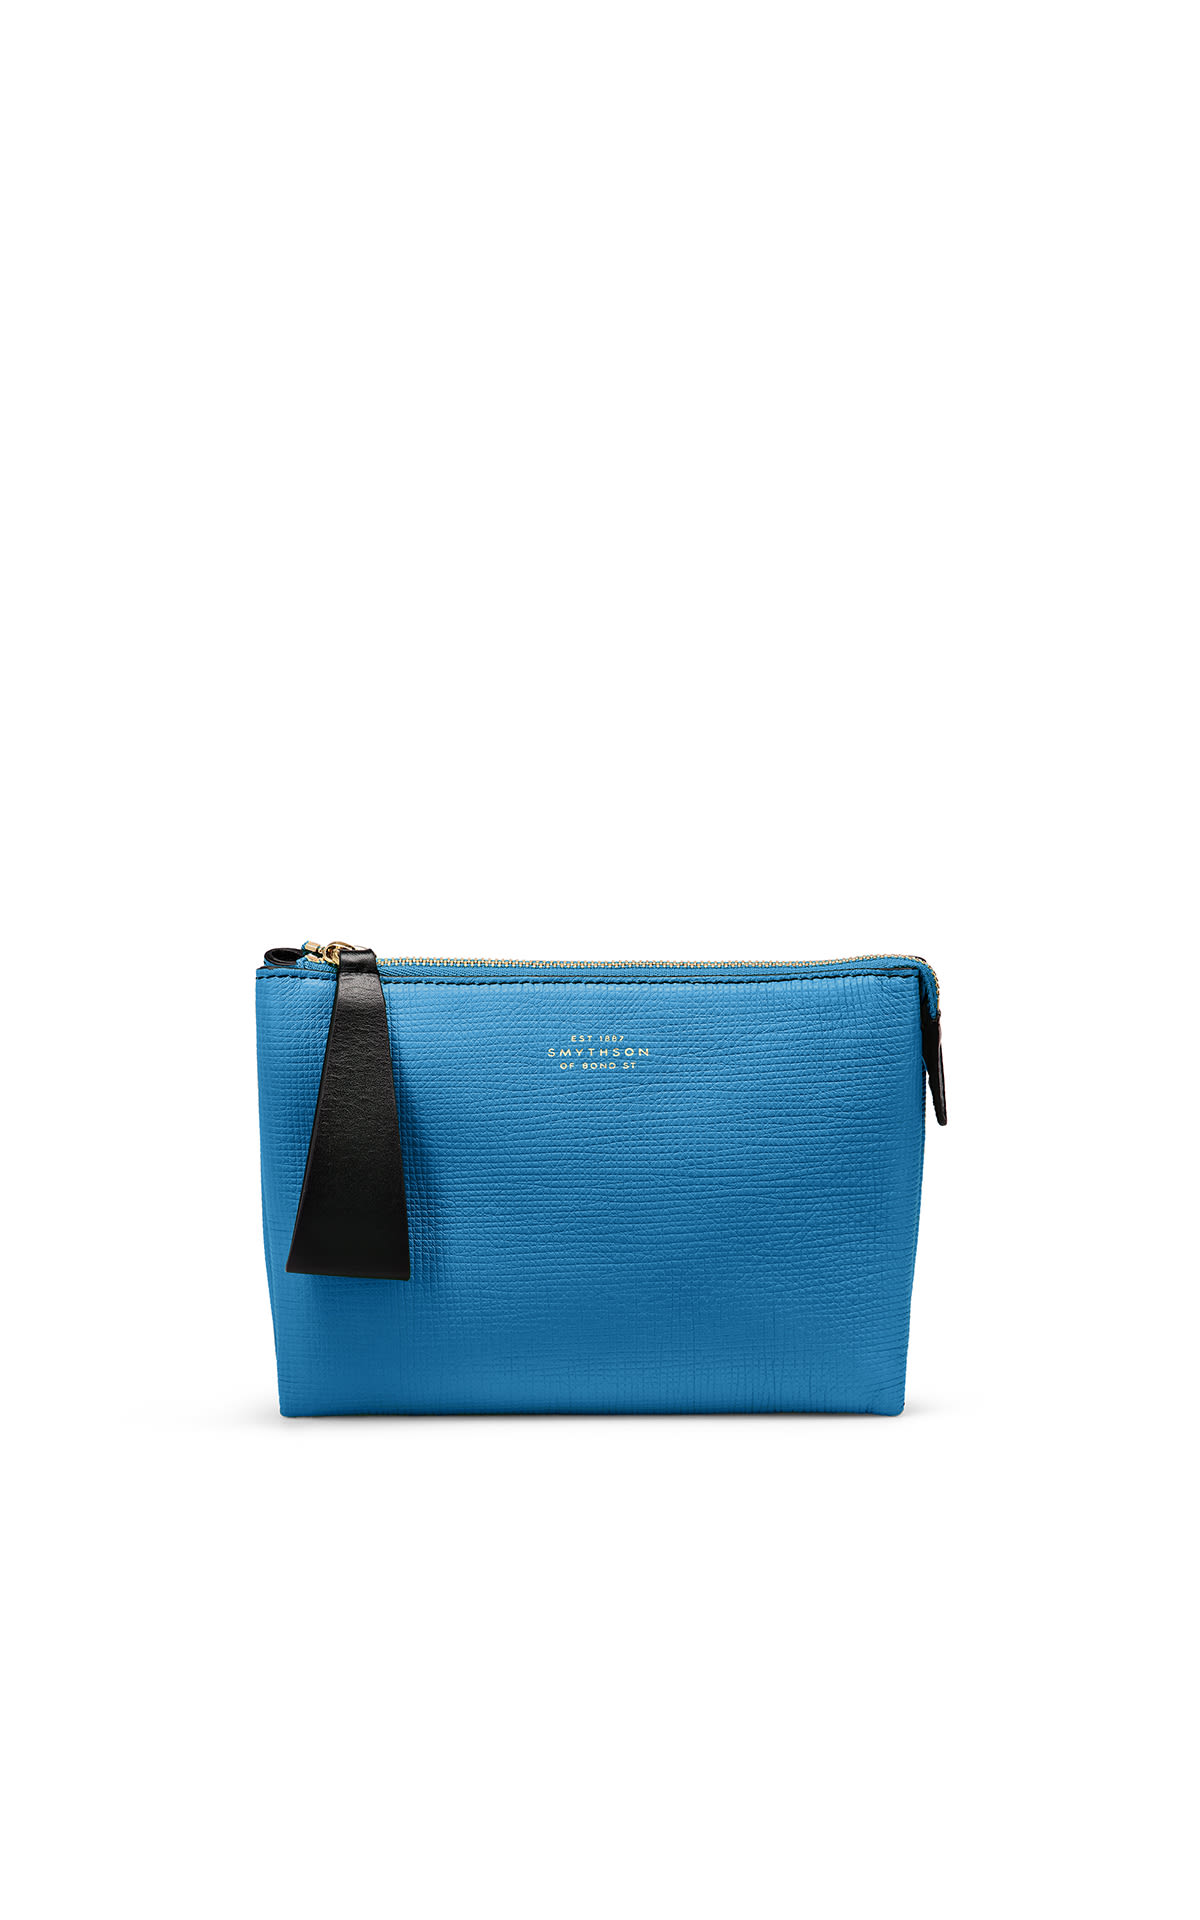 Smythson Small pillow pouch azure from Bicester Village